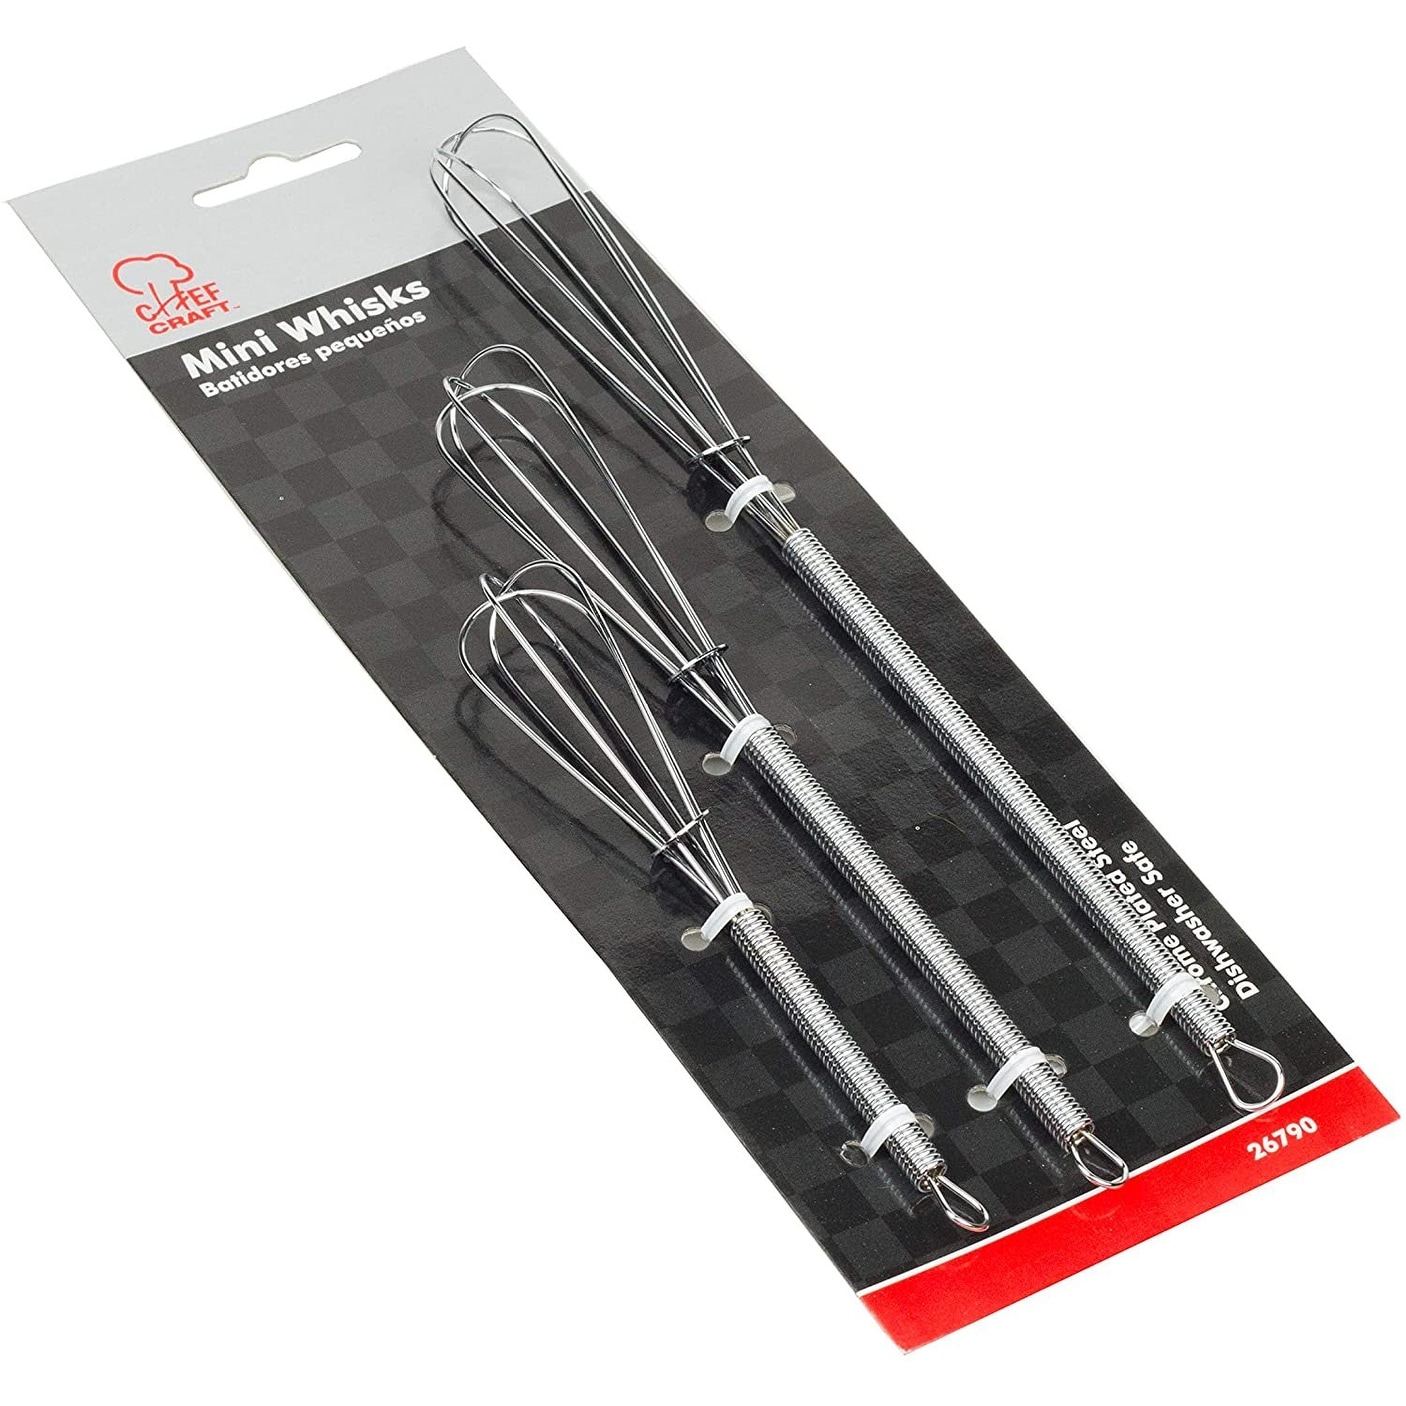 https://ak1.ostkcdn.com/images/products/is/images/direct/0e253ed72d04055c9b704818f8afae7088e89bb3/Chef-Craft-3pc-Chrome-Plated-Steel-Mini-Whisk-Set---Great-for-Sauces%2C-Dressing%2C-Eggs-and-More.jpg